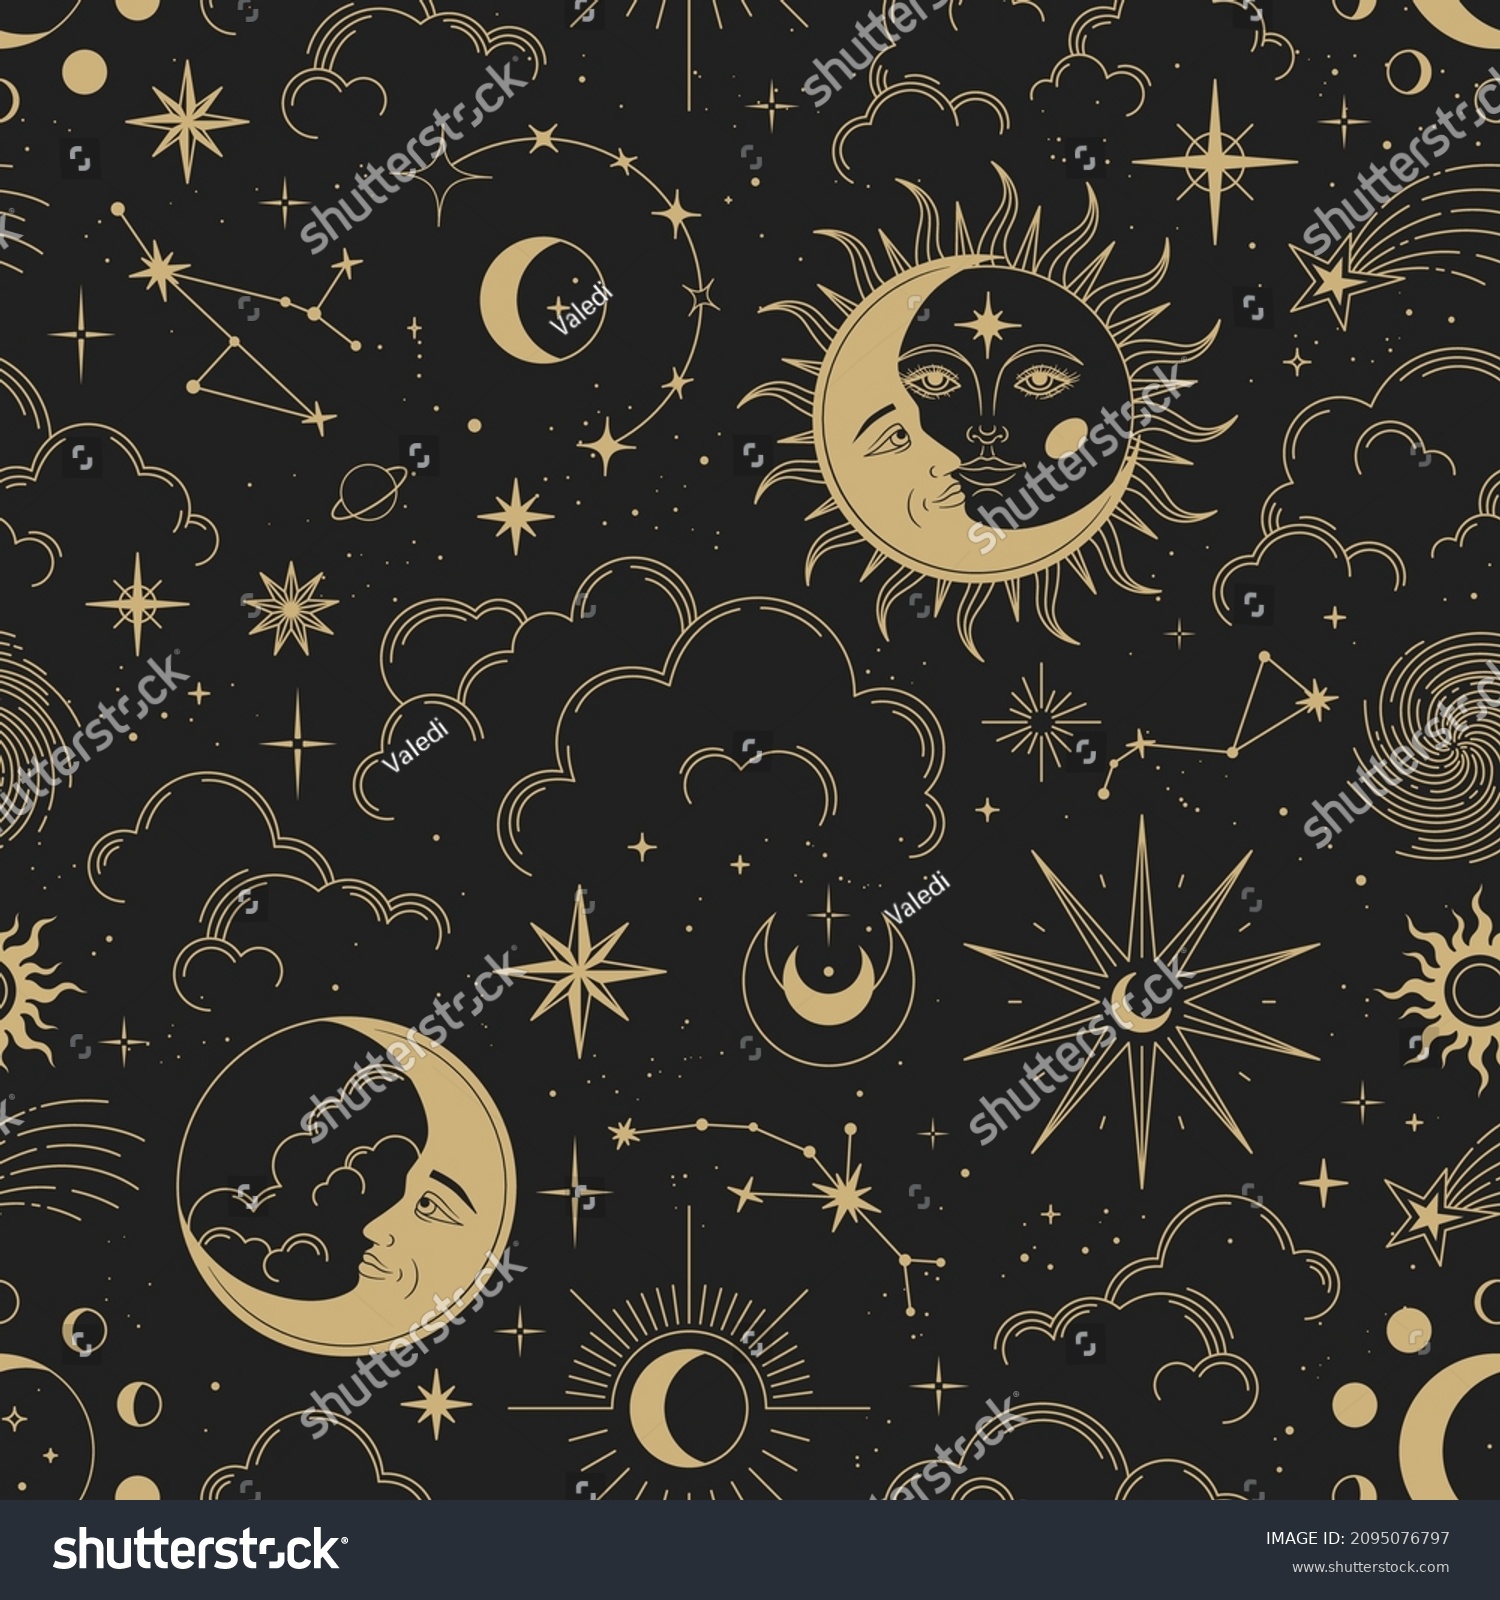 Magic seamless vector pattern with sun, constellations, moons and stars. Gold decorative ornament. Graphic pattern for astrology, esoteric, tarot, mystic and magic. Luxury elegant design. #2095076797